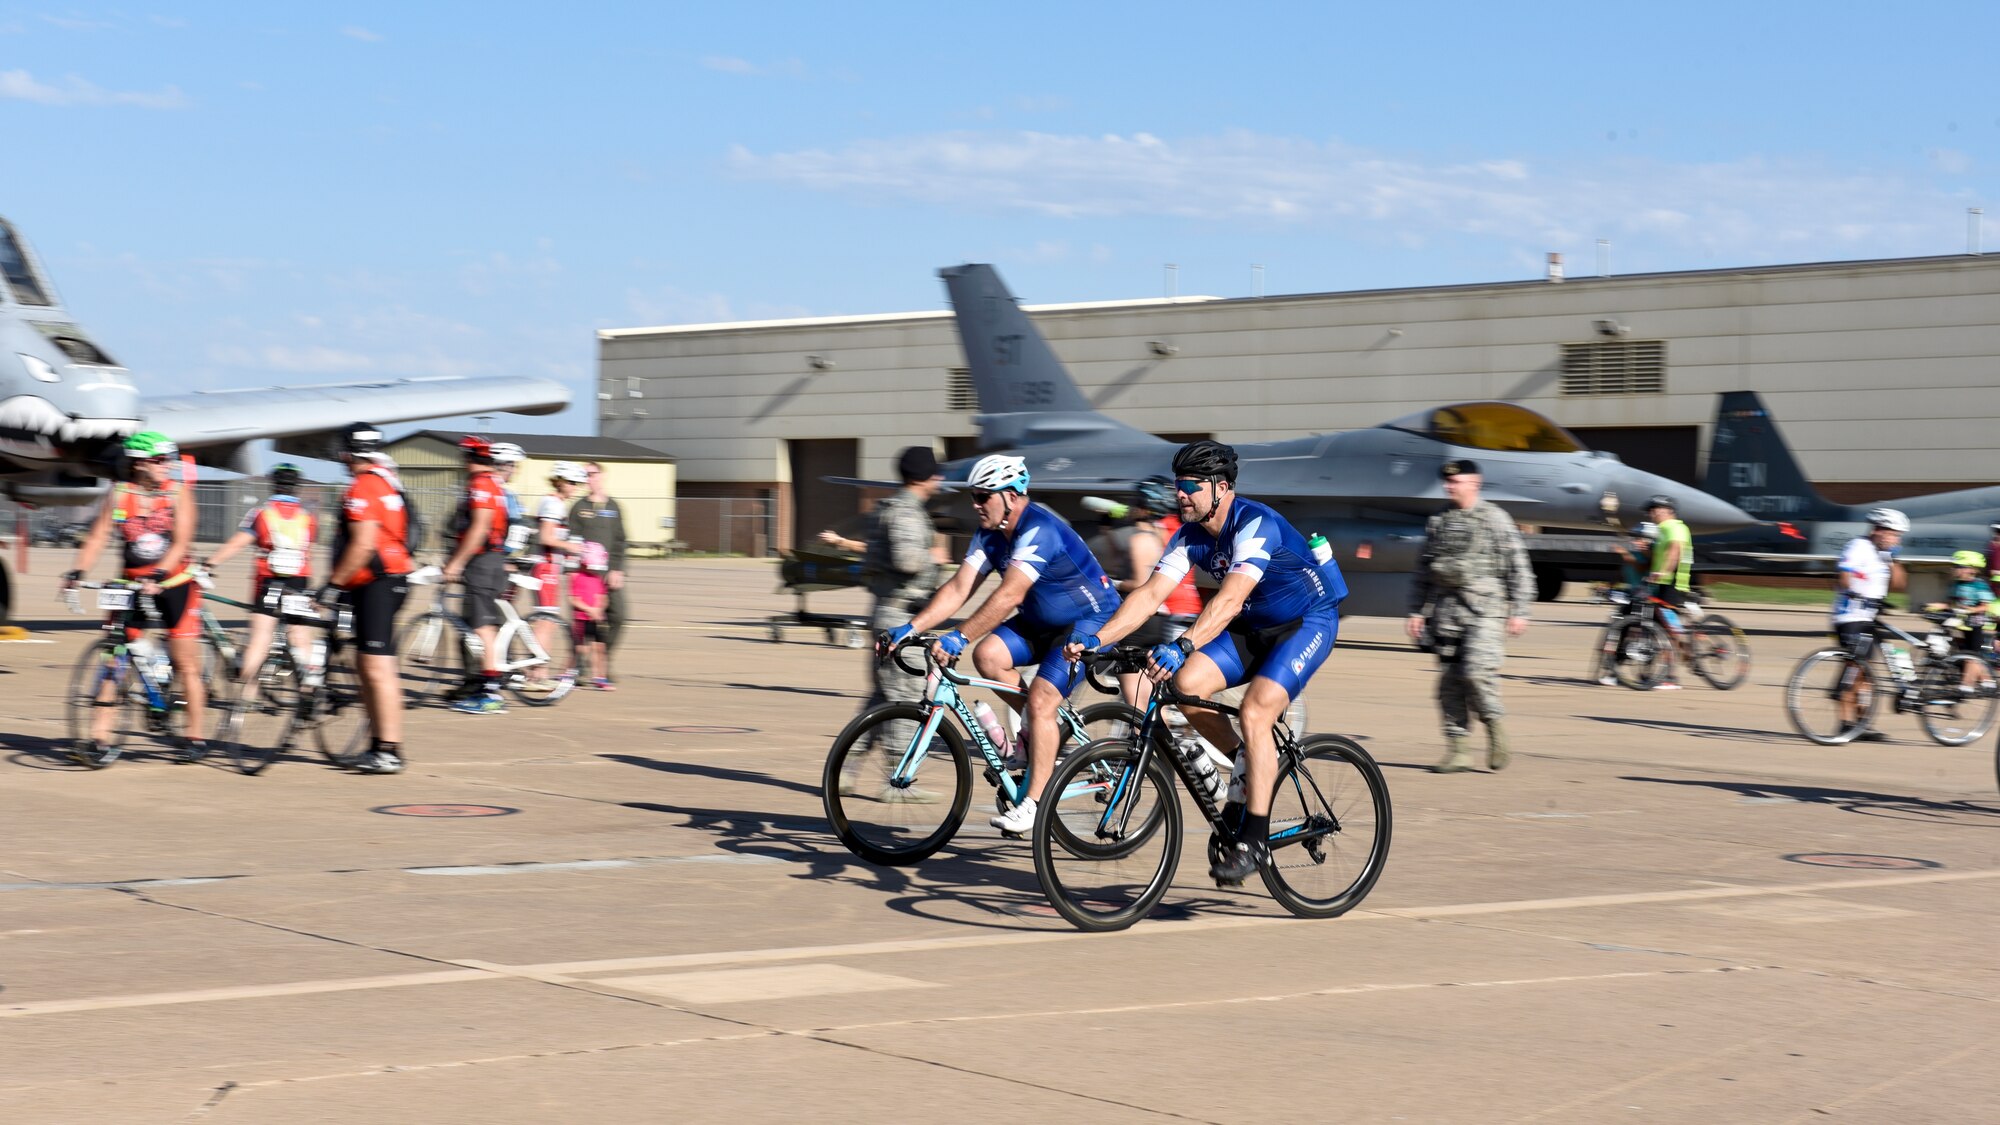 Two bikers in blue pass through Airpower Alley so quickly the background is blurred.